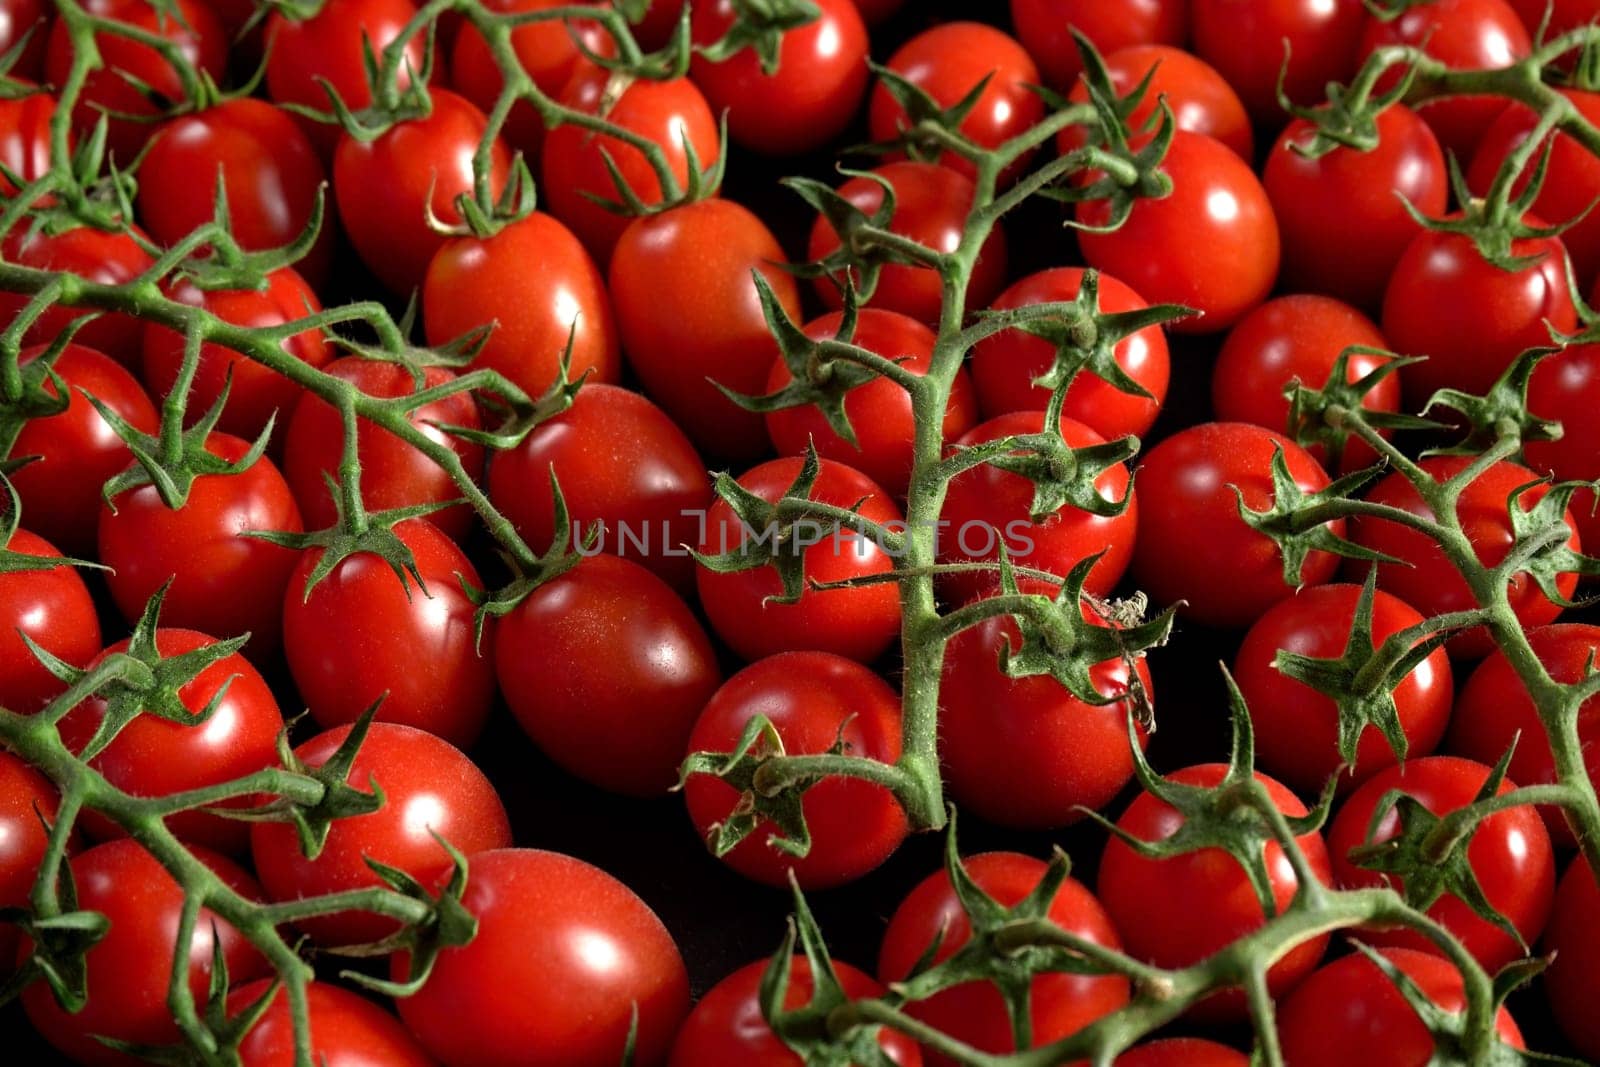 Group of small tomatoes with green stems, view from above